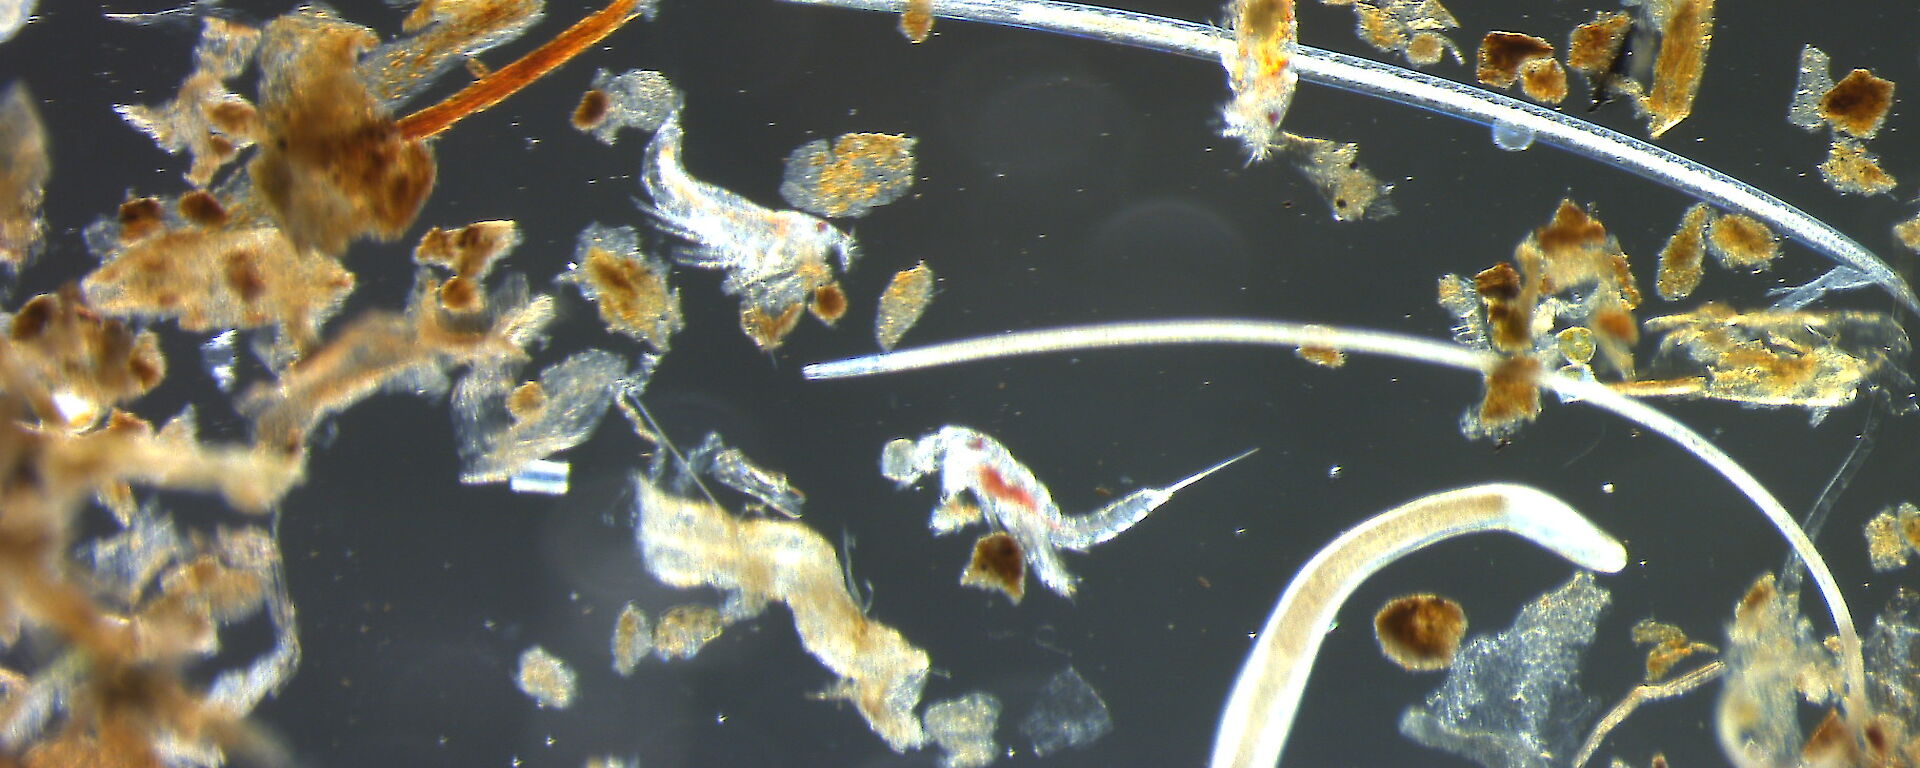 A mixture of nematodes and copepods, isolated from a sediment sample, under the microscope.